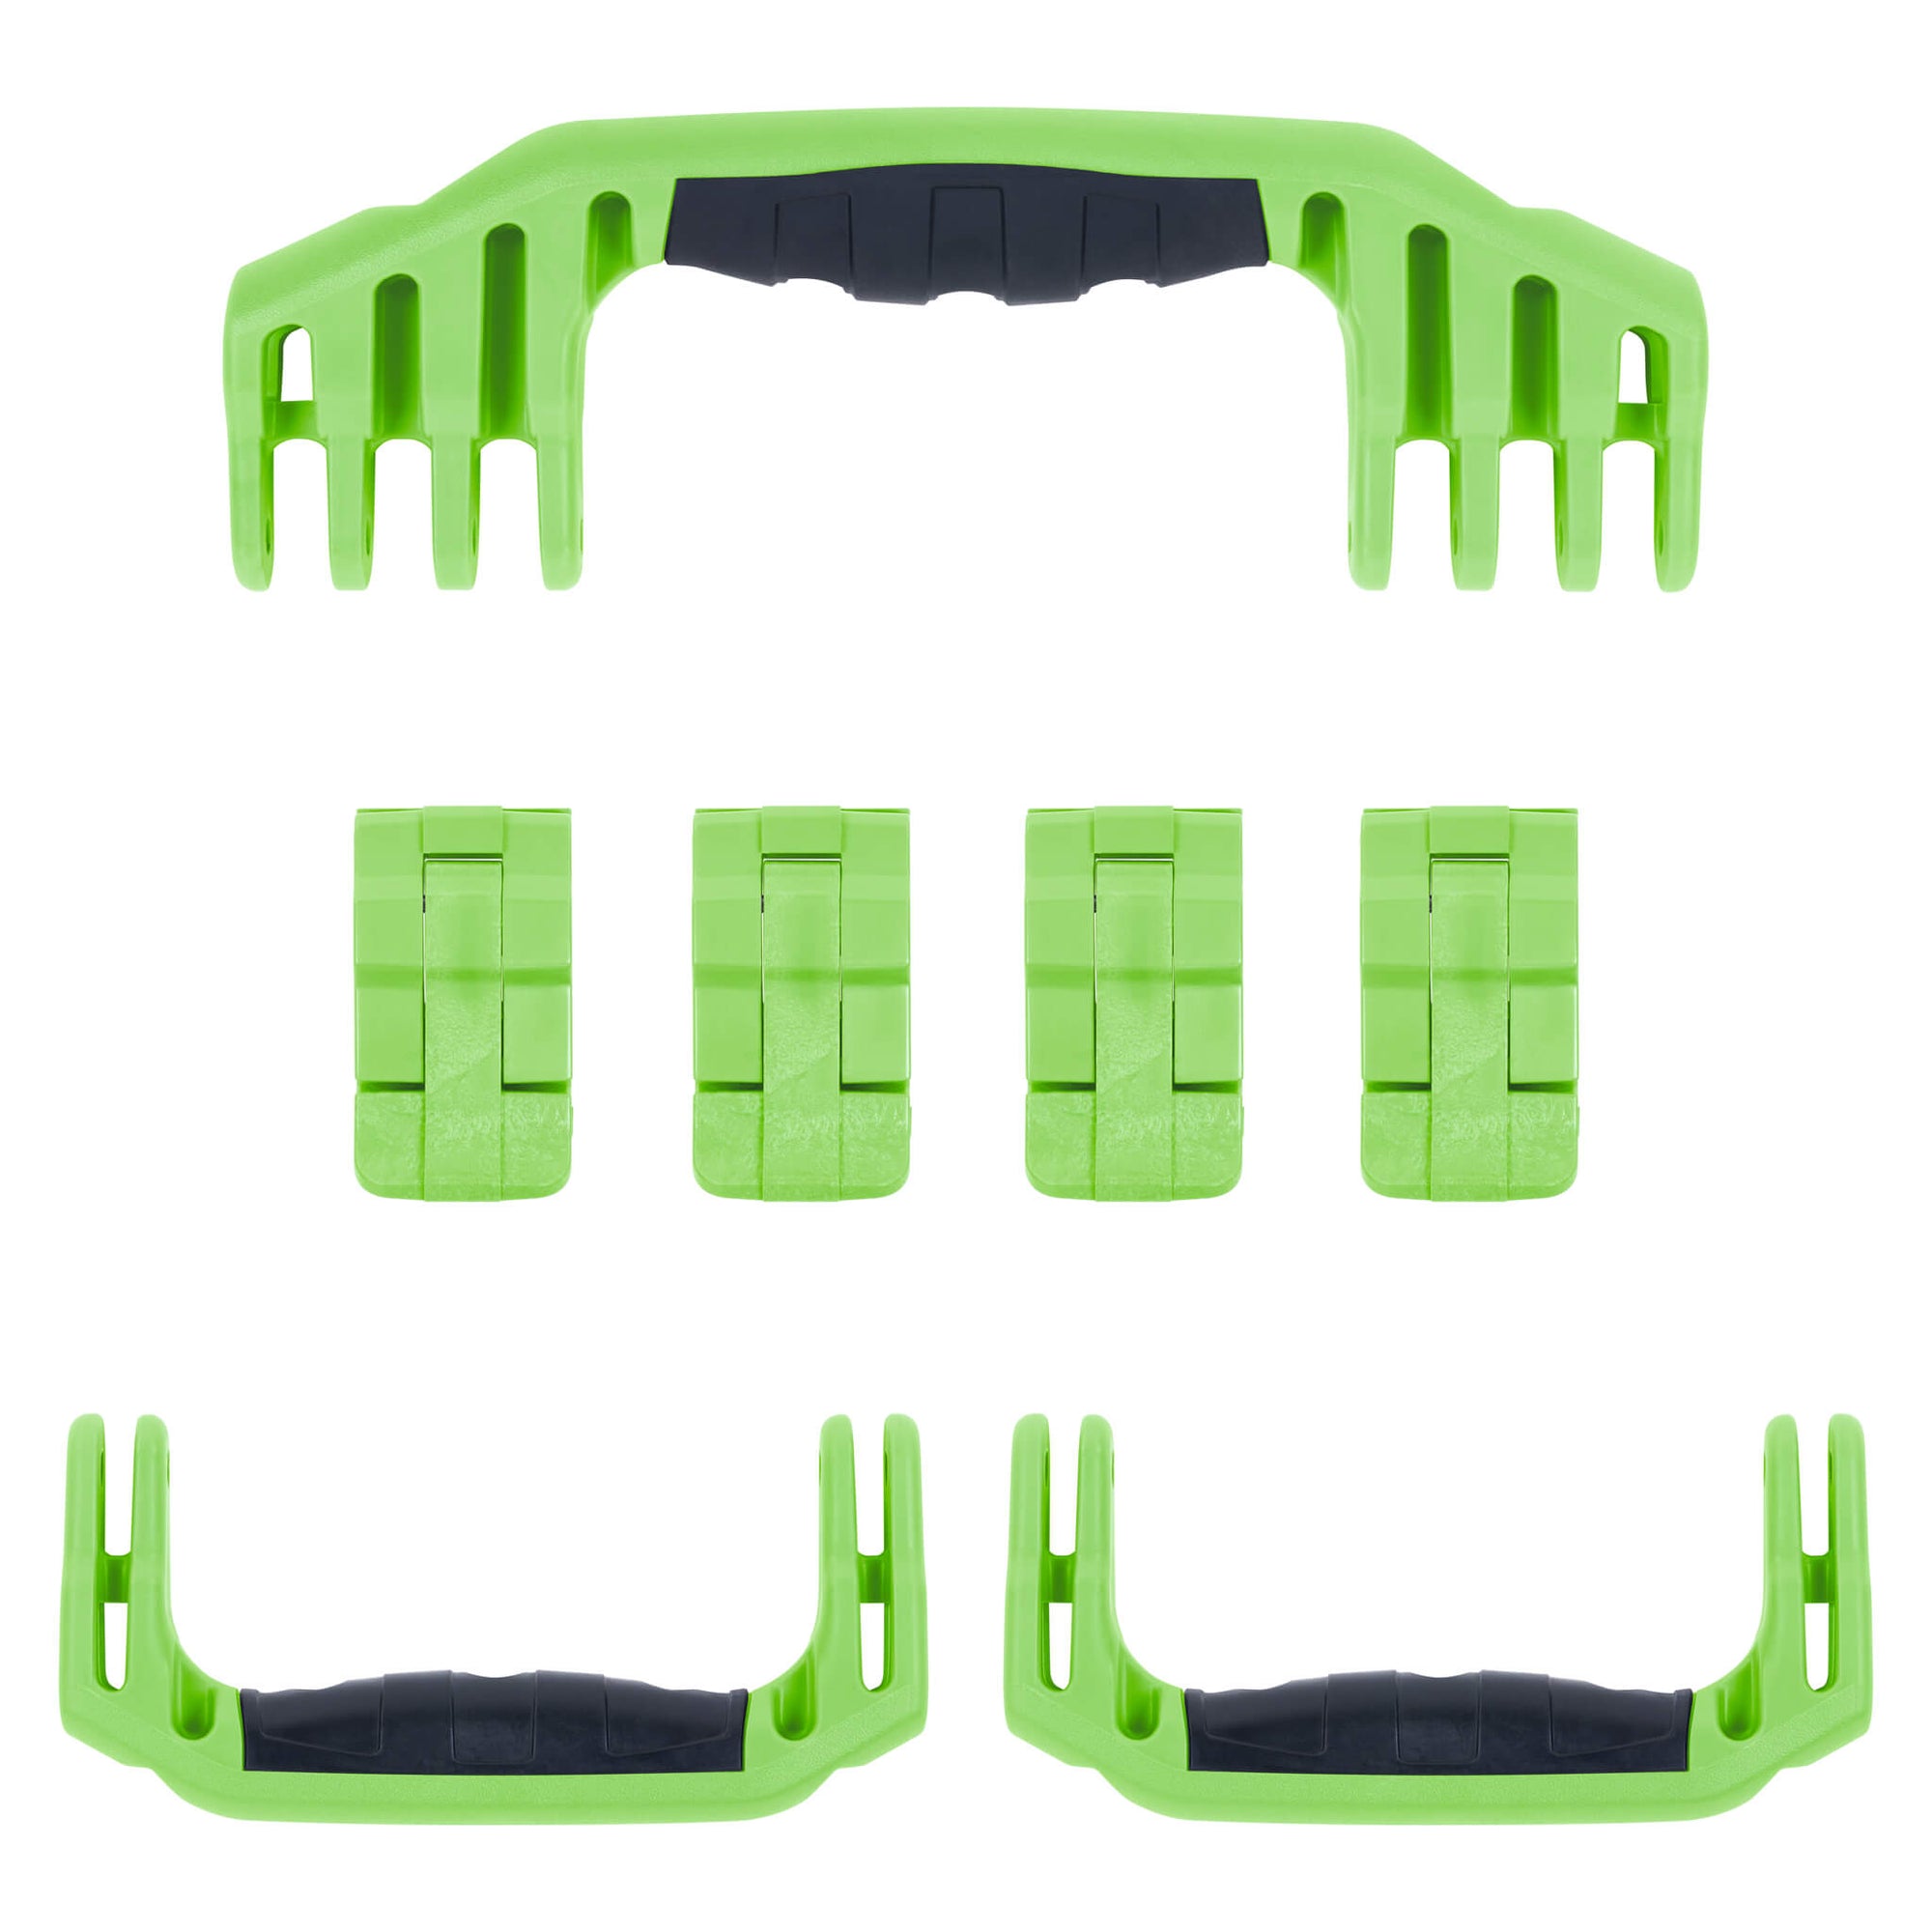 Pelican 1620 Replacement Handles & Latches, Lime Green (Set of 3 Handles, 4 Latches) ColorCase 